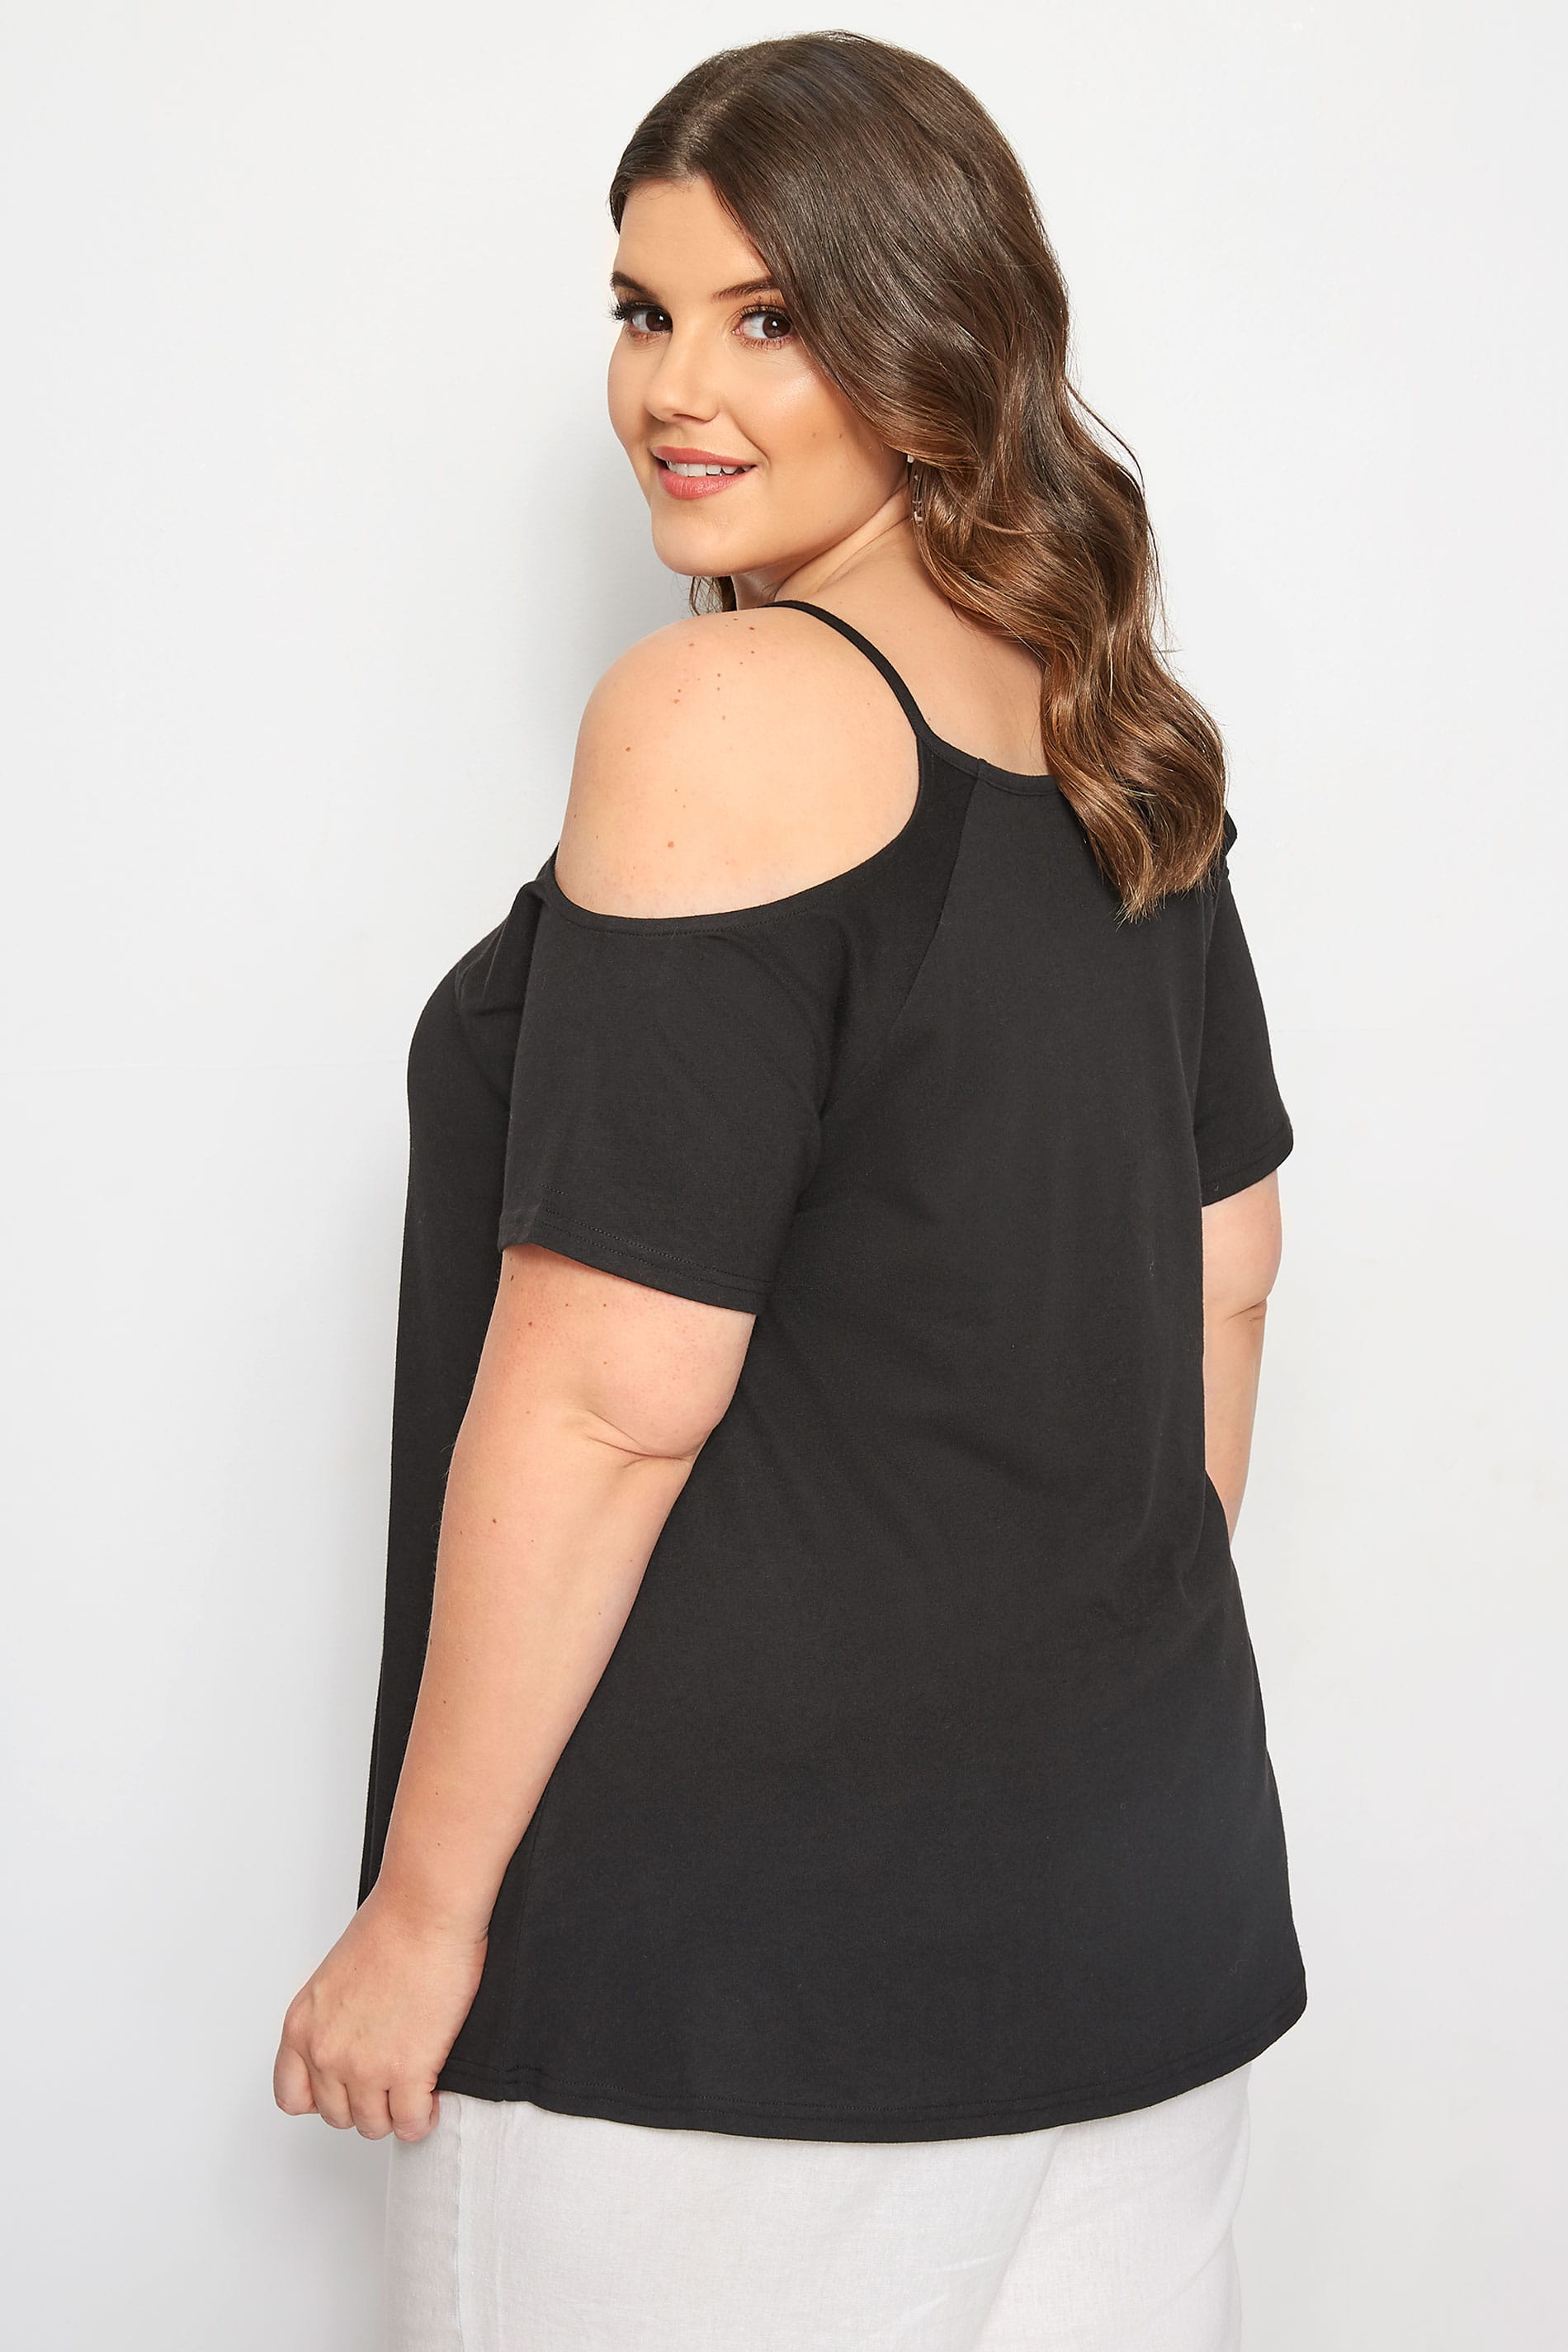 Black Cold Shoulder Top | Plus Sizes 16 to 36 | Yours Clothing